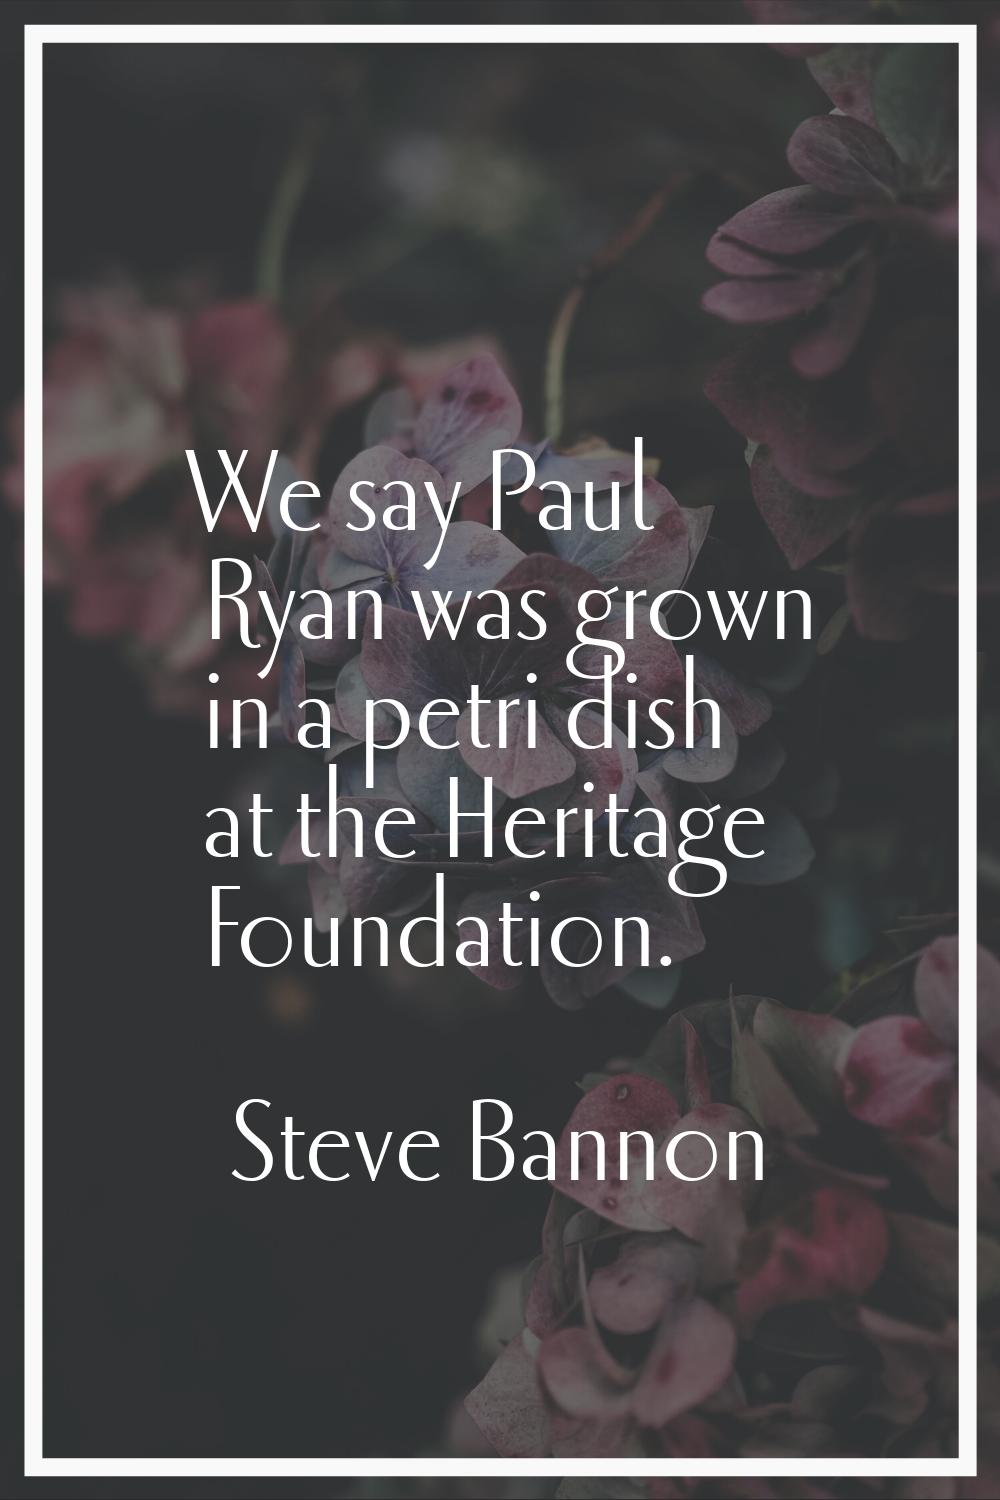 We say Paul Ryan was grown in a petri dish at the Heritage Foundation.